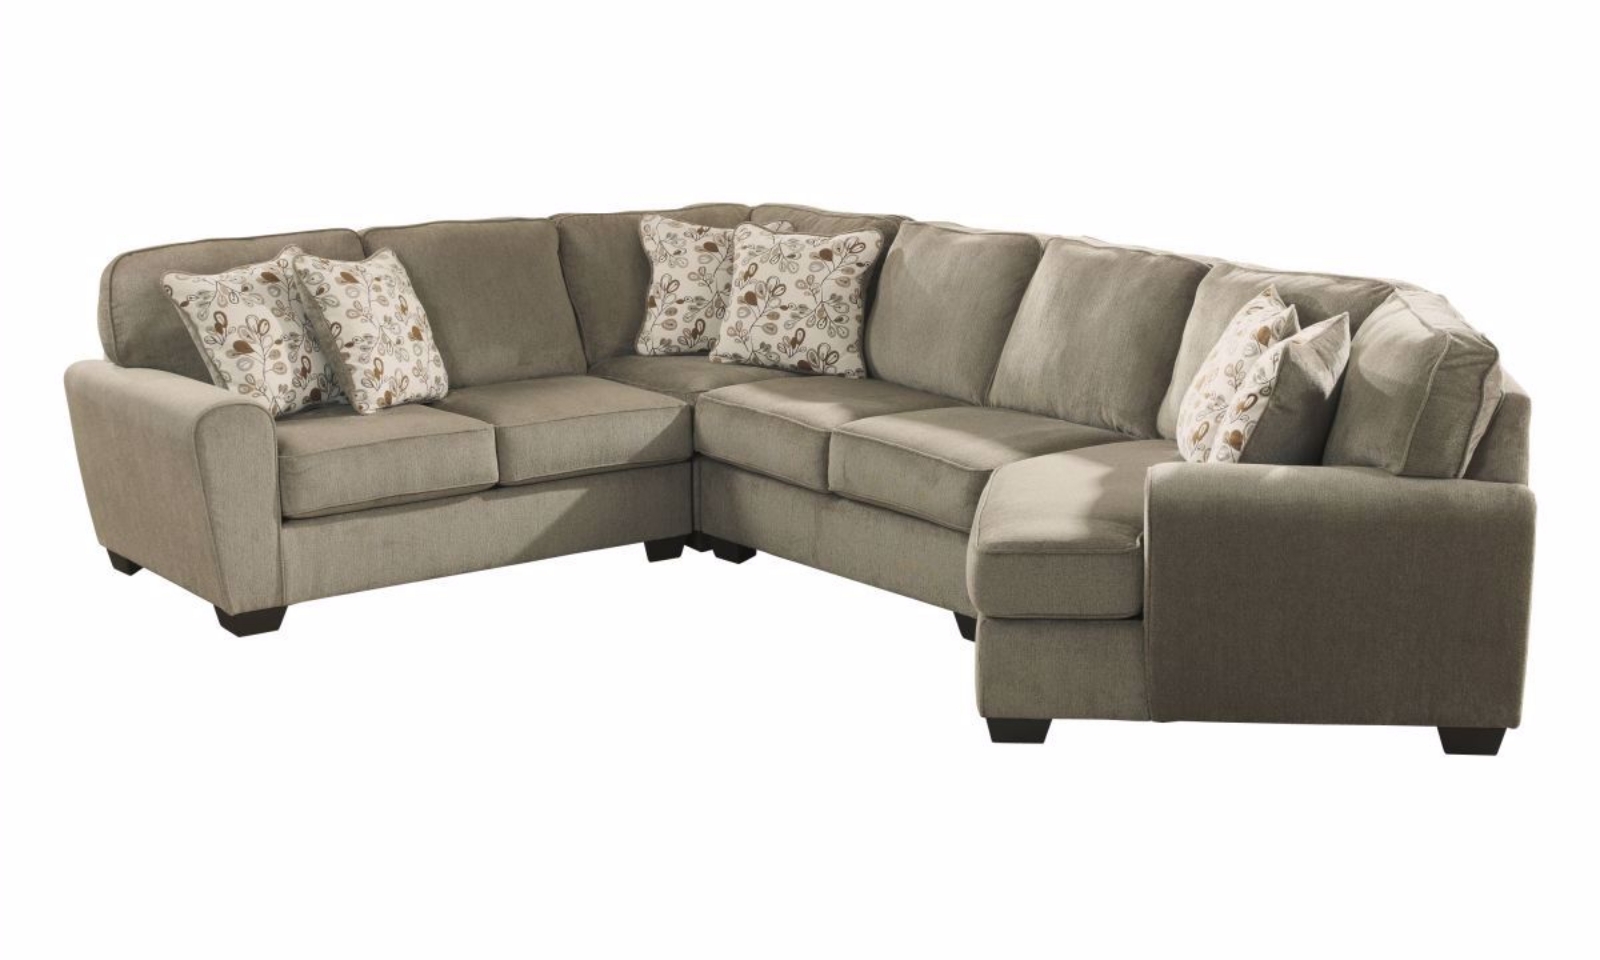 Picture of Patola Park Sectional